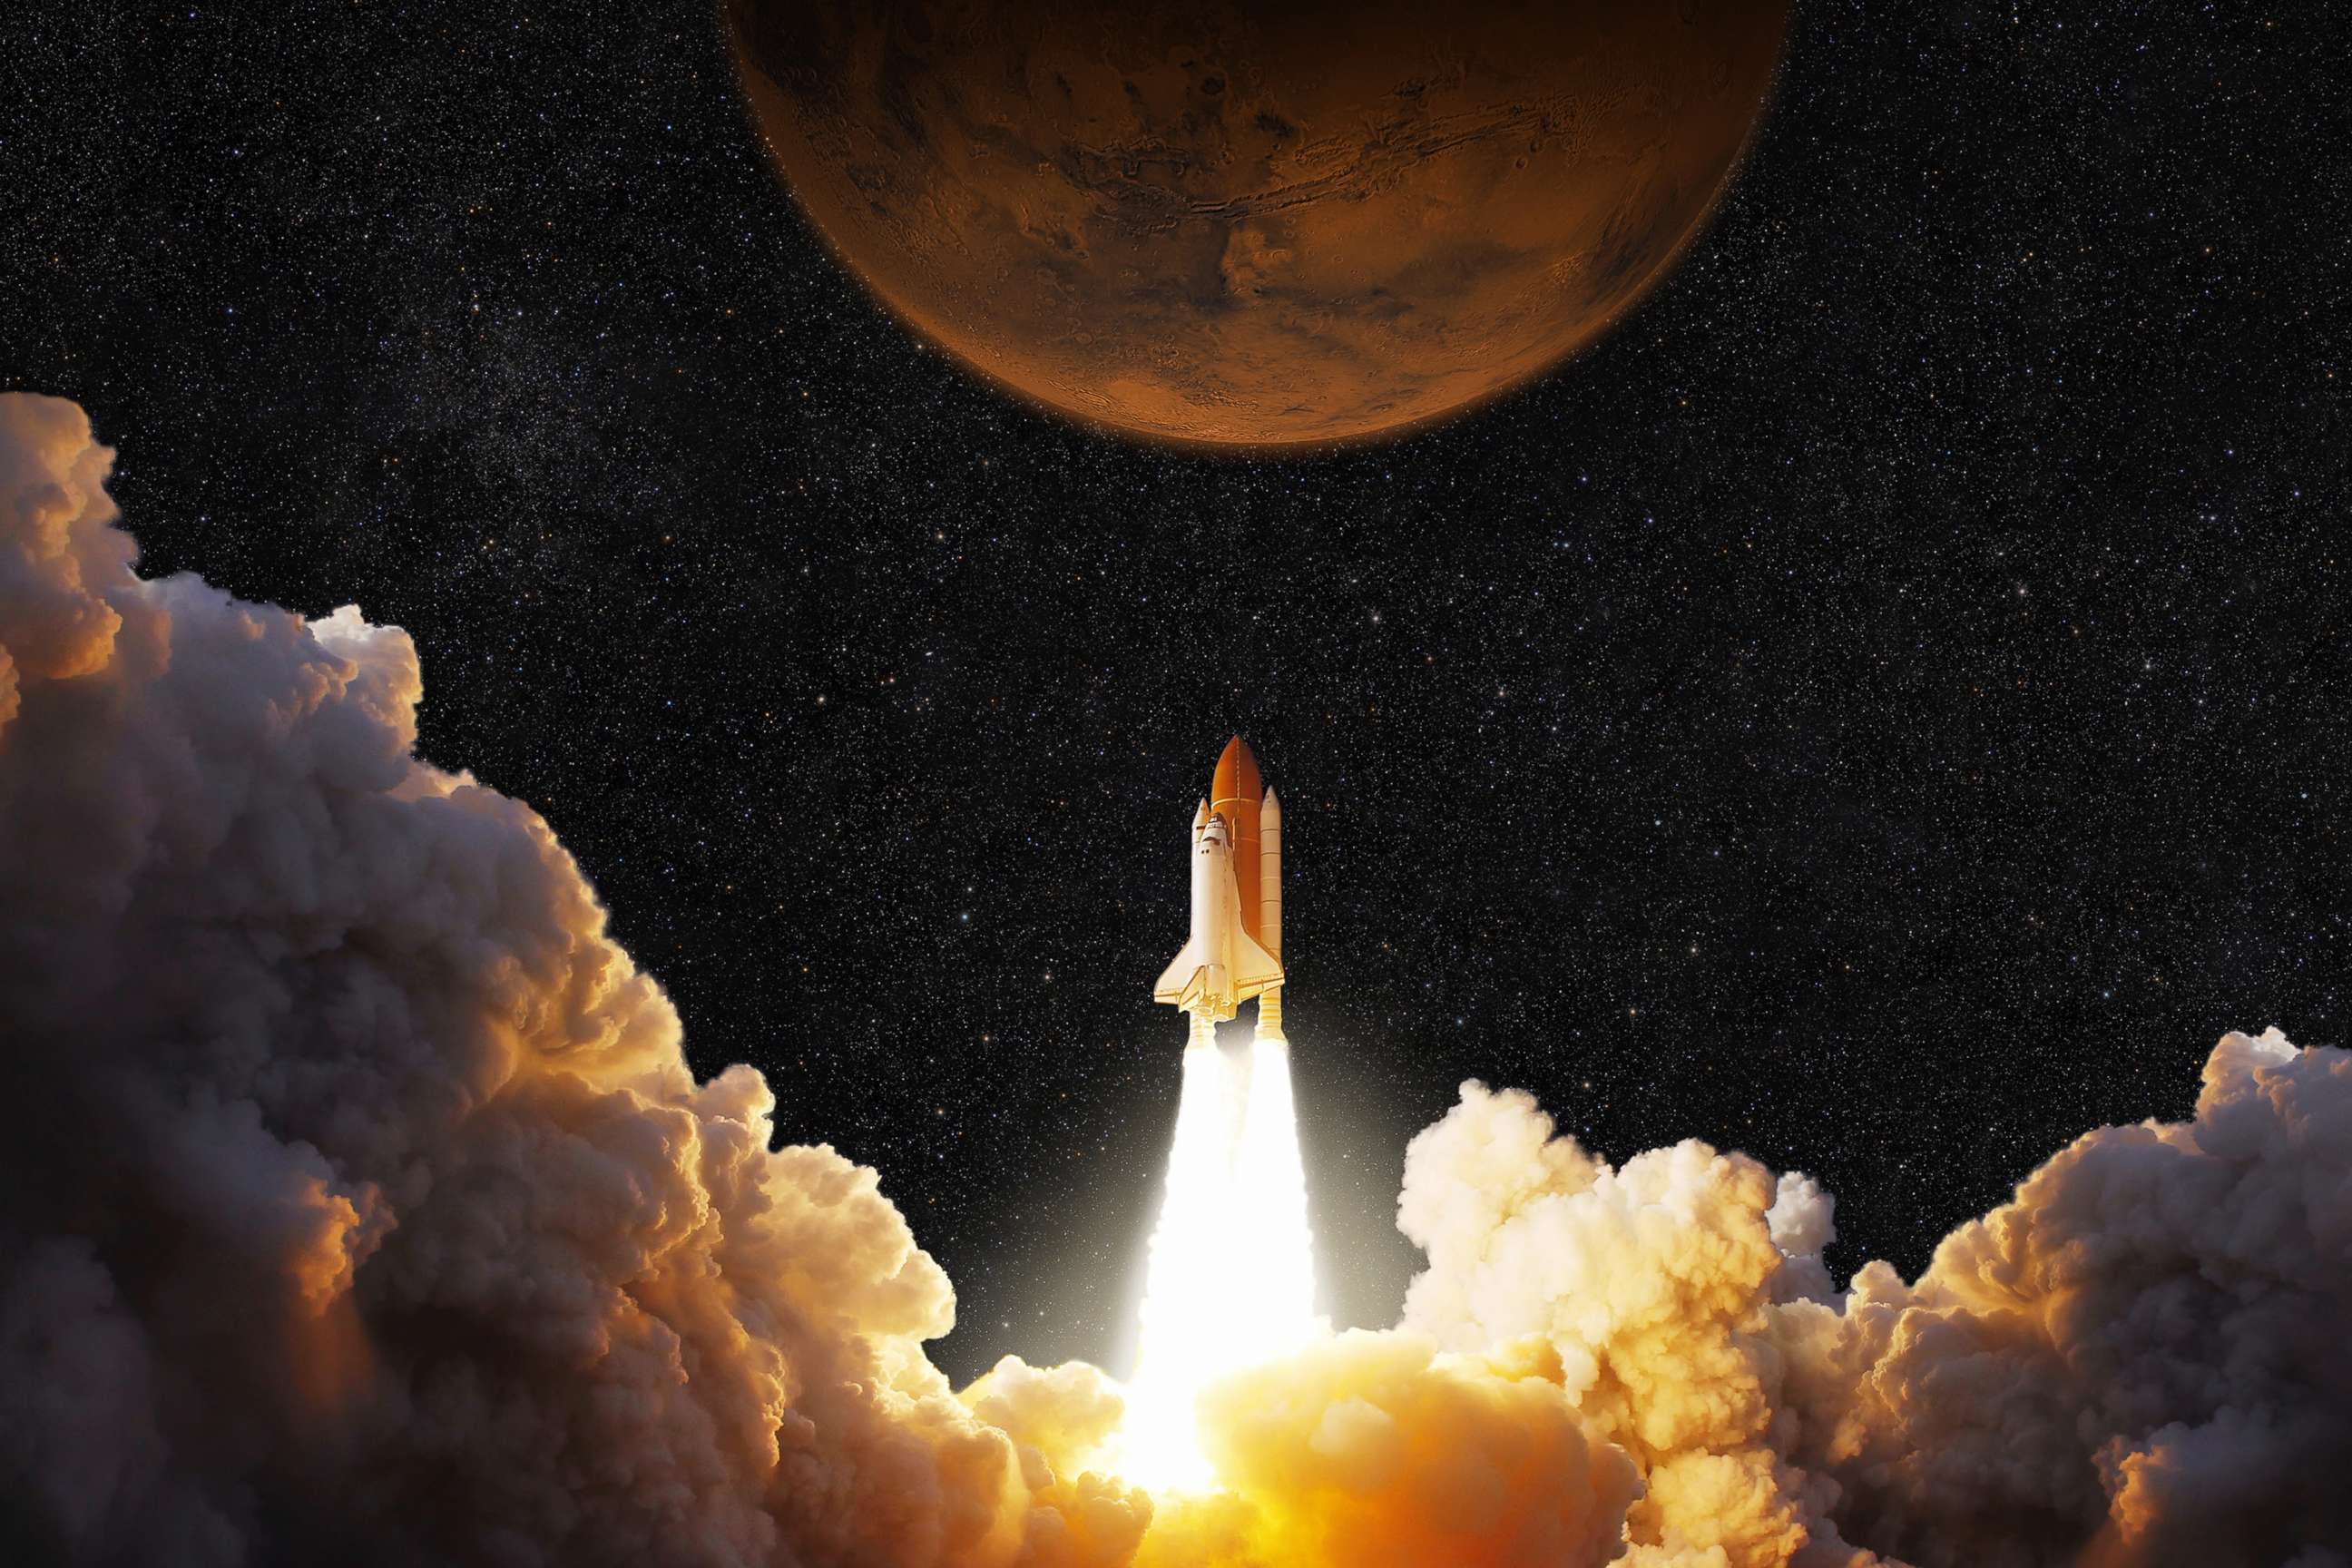 PHOTO: A spacecraft takes off into space headed to planet Mars in an undated illustration.